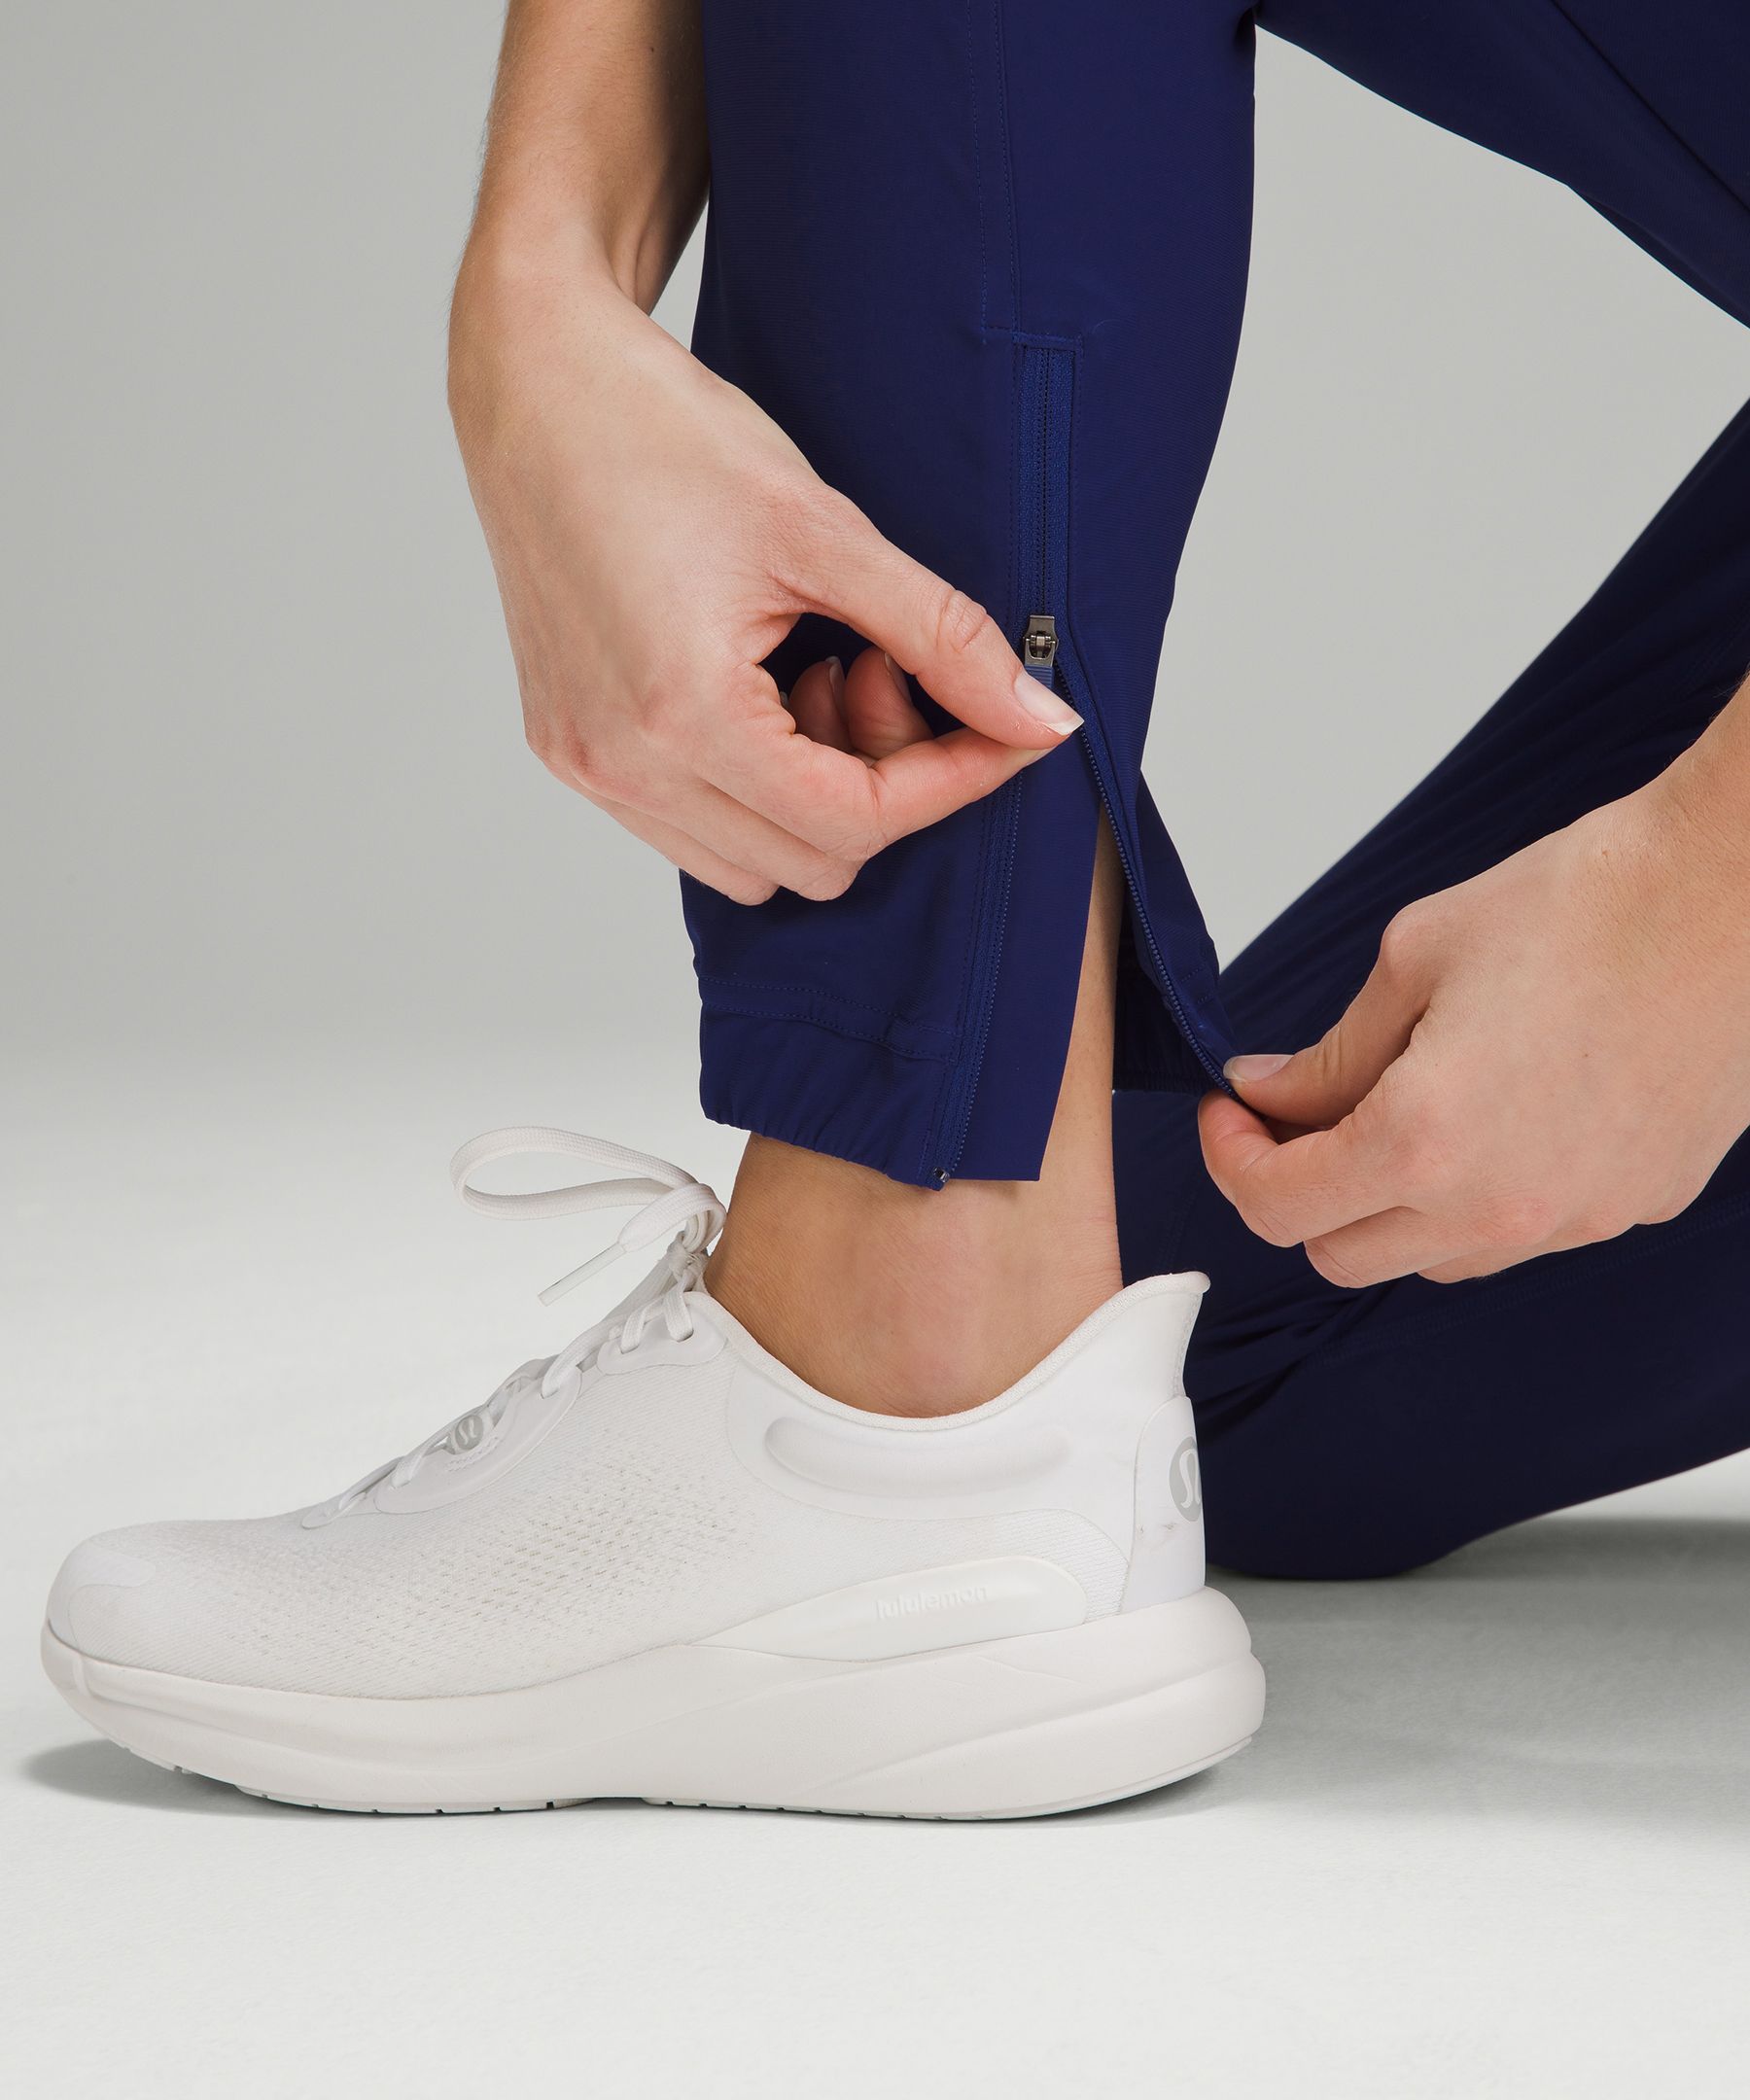 Swiftly LS x Adapted State Joggers?? 😚👌🏼 : r/lululemon